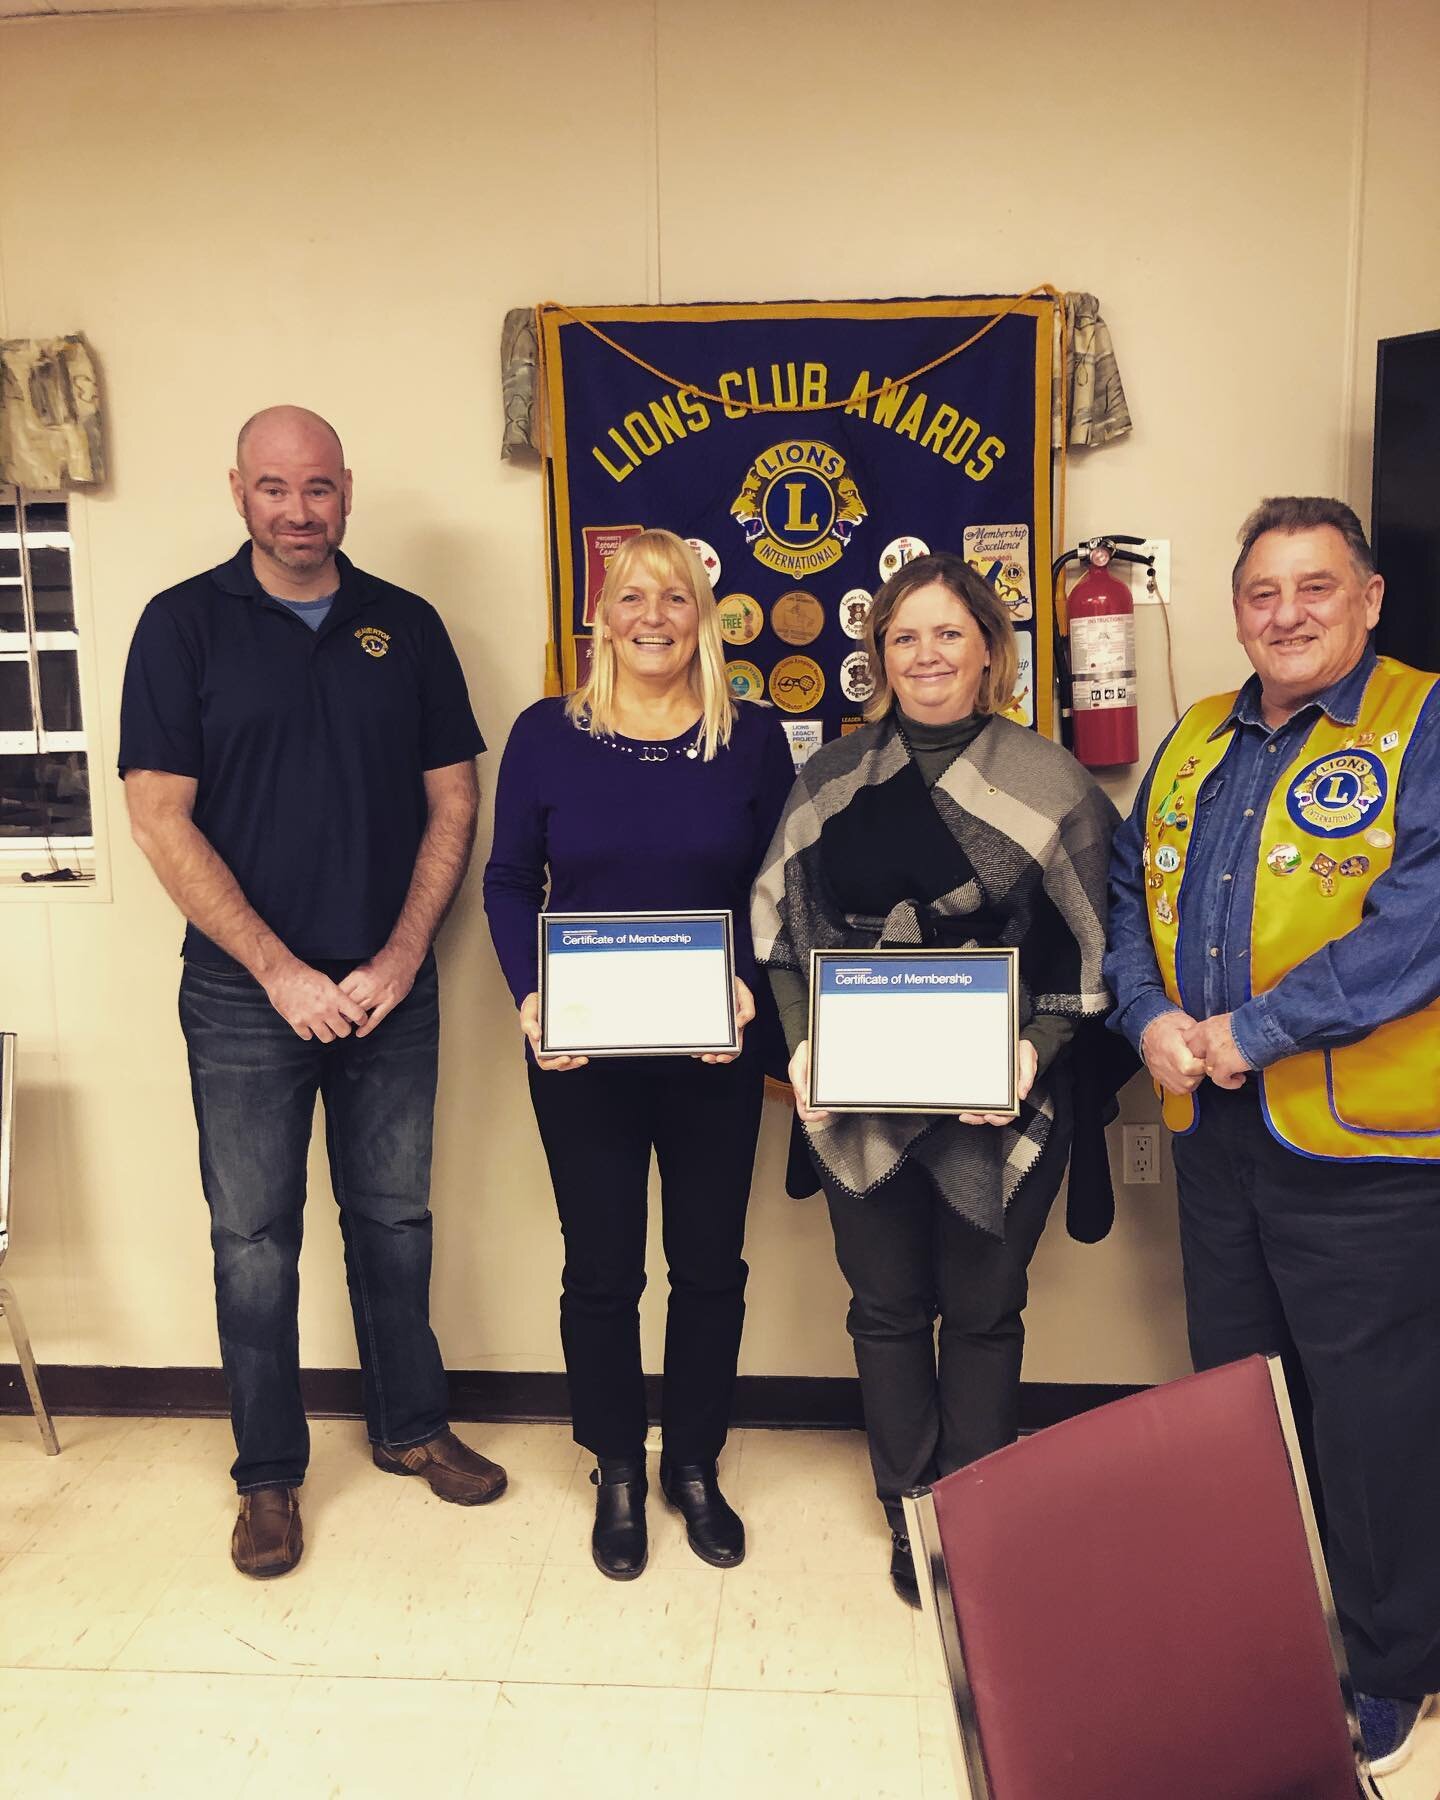 A huge welcome to our two new members Irene Skinner and Tamara Inkpen! Welcome to the Beaverton Lions Club, we look forward to your amazing acts of Lionism #beavertonlionsclub